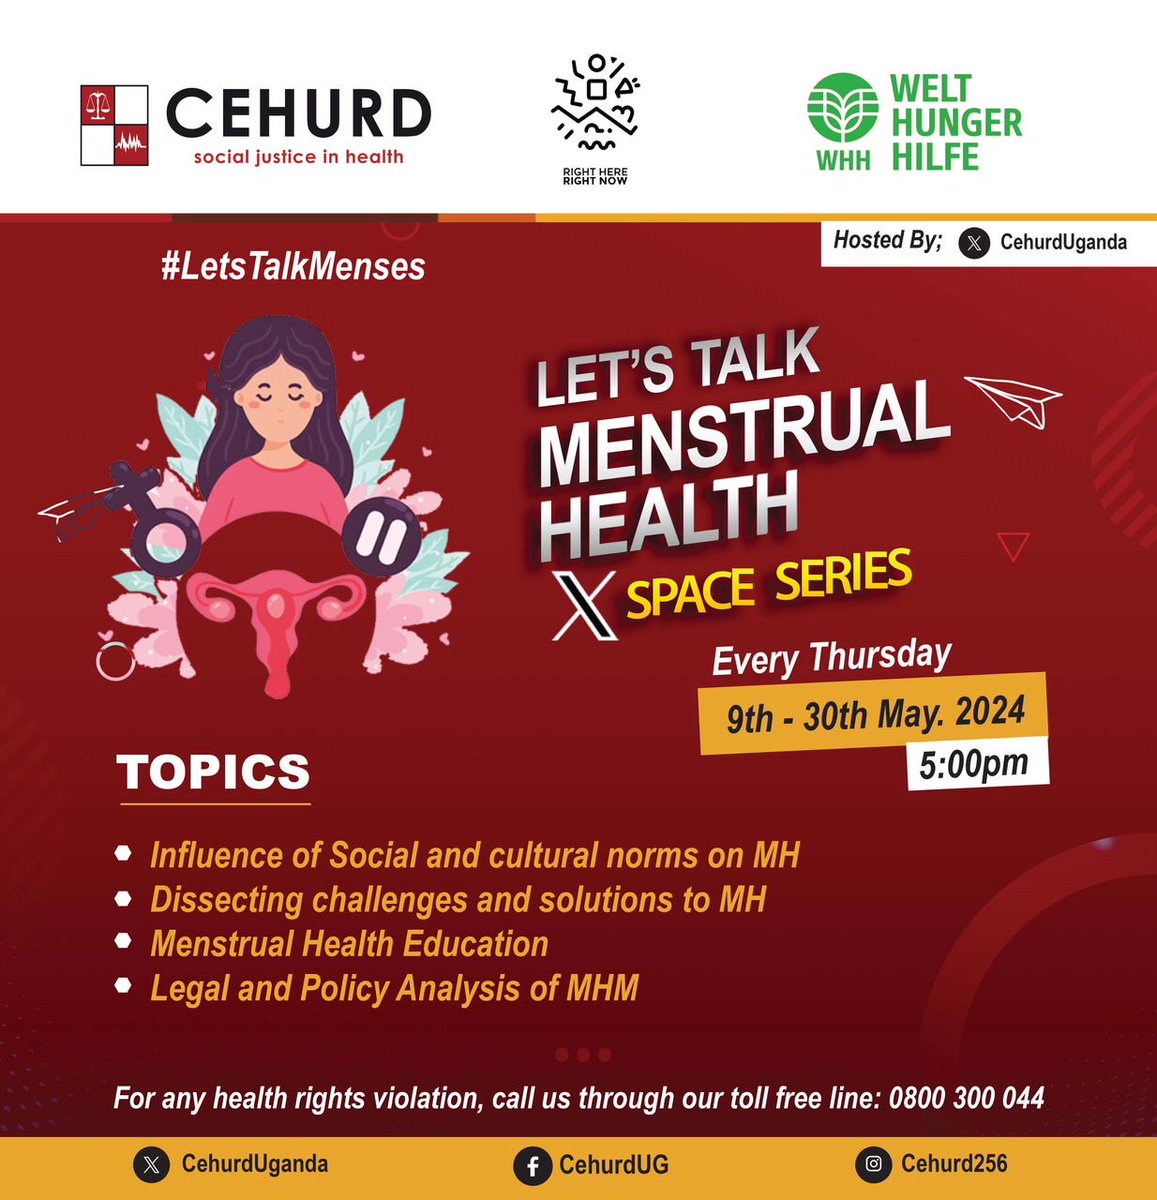 Menstrual management is still a very big challenge among young girls across the country. Join us every Thursday starting today 5:00pm EAT as @cehurduganda takes lead in the menstrual health discussions on their x space page. #SomethingNeedsToChange